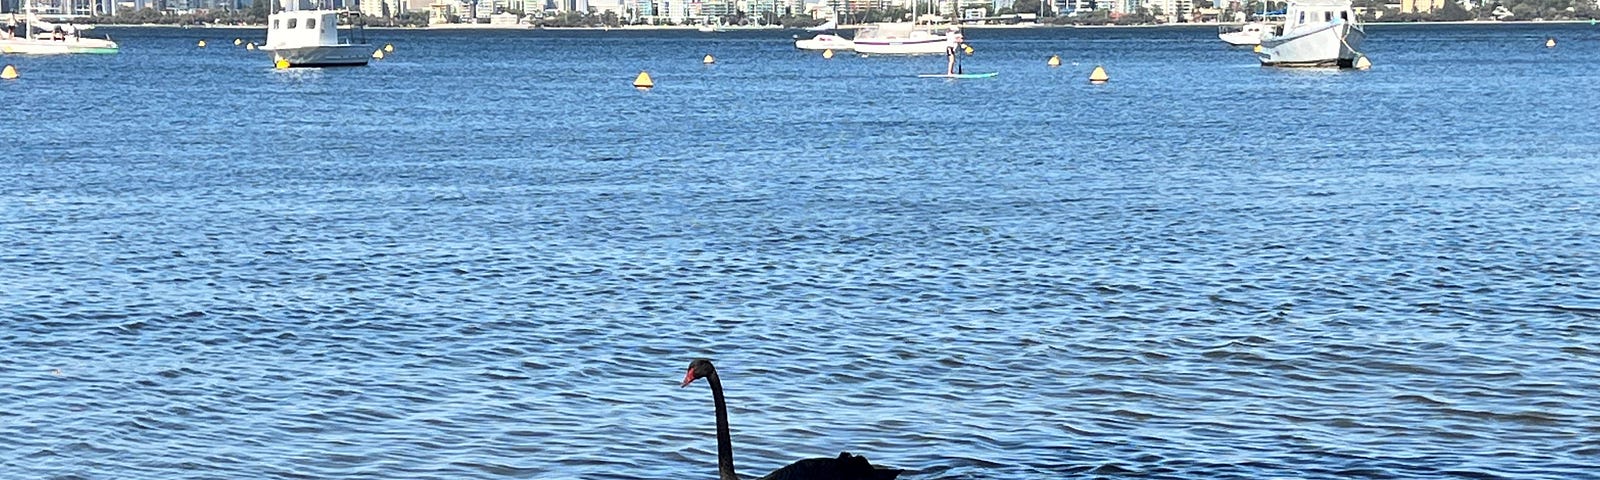 Black swan in blue river with city skyline in the background